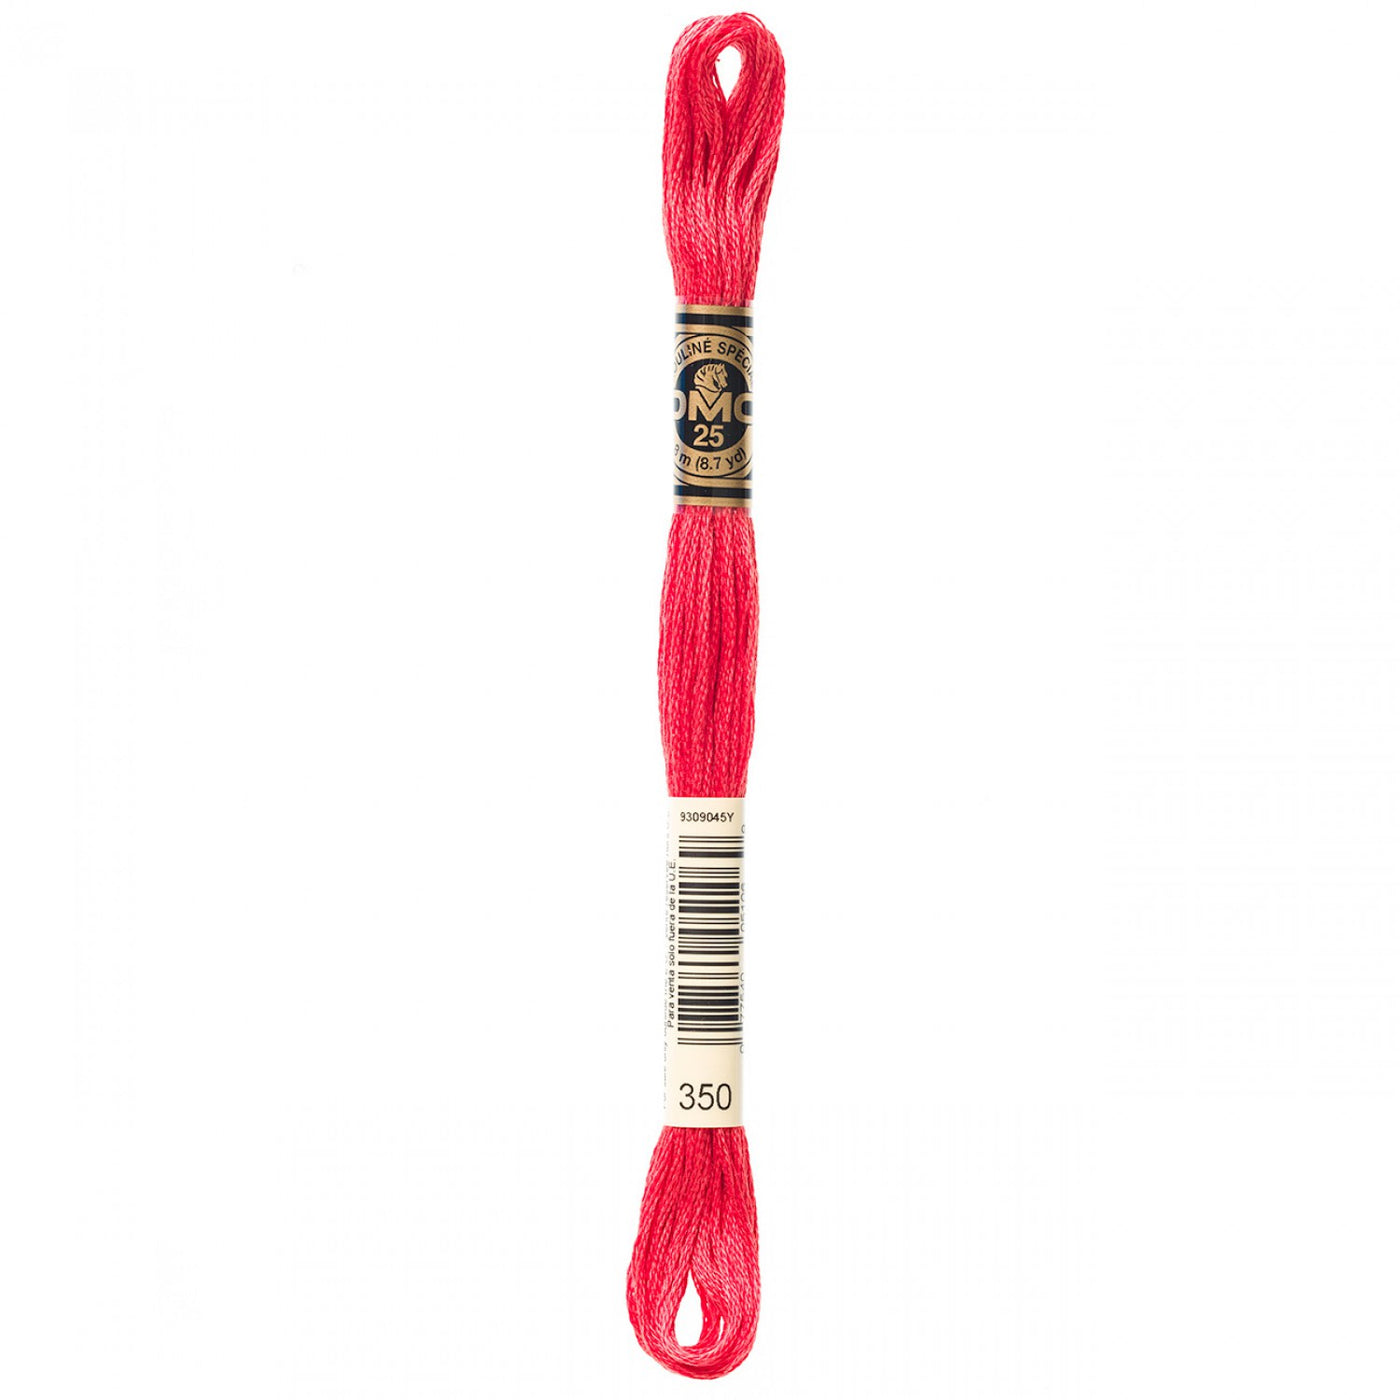 6-Strand Embroidery Floss 350 Med Coral (4507947040813)